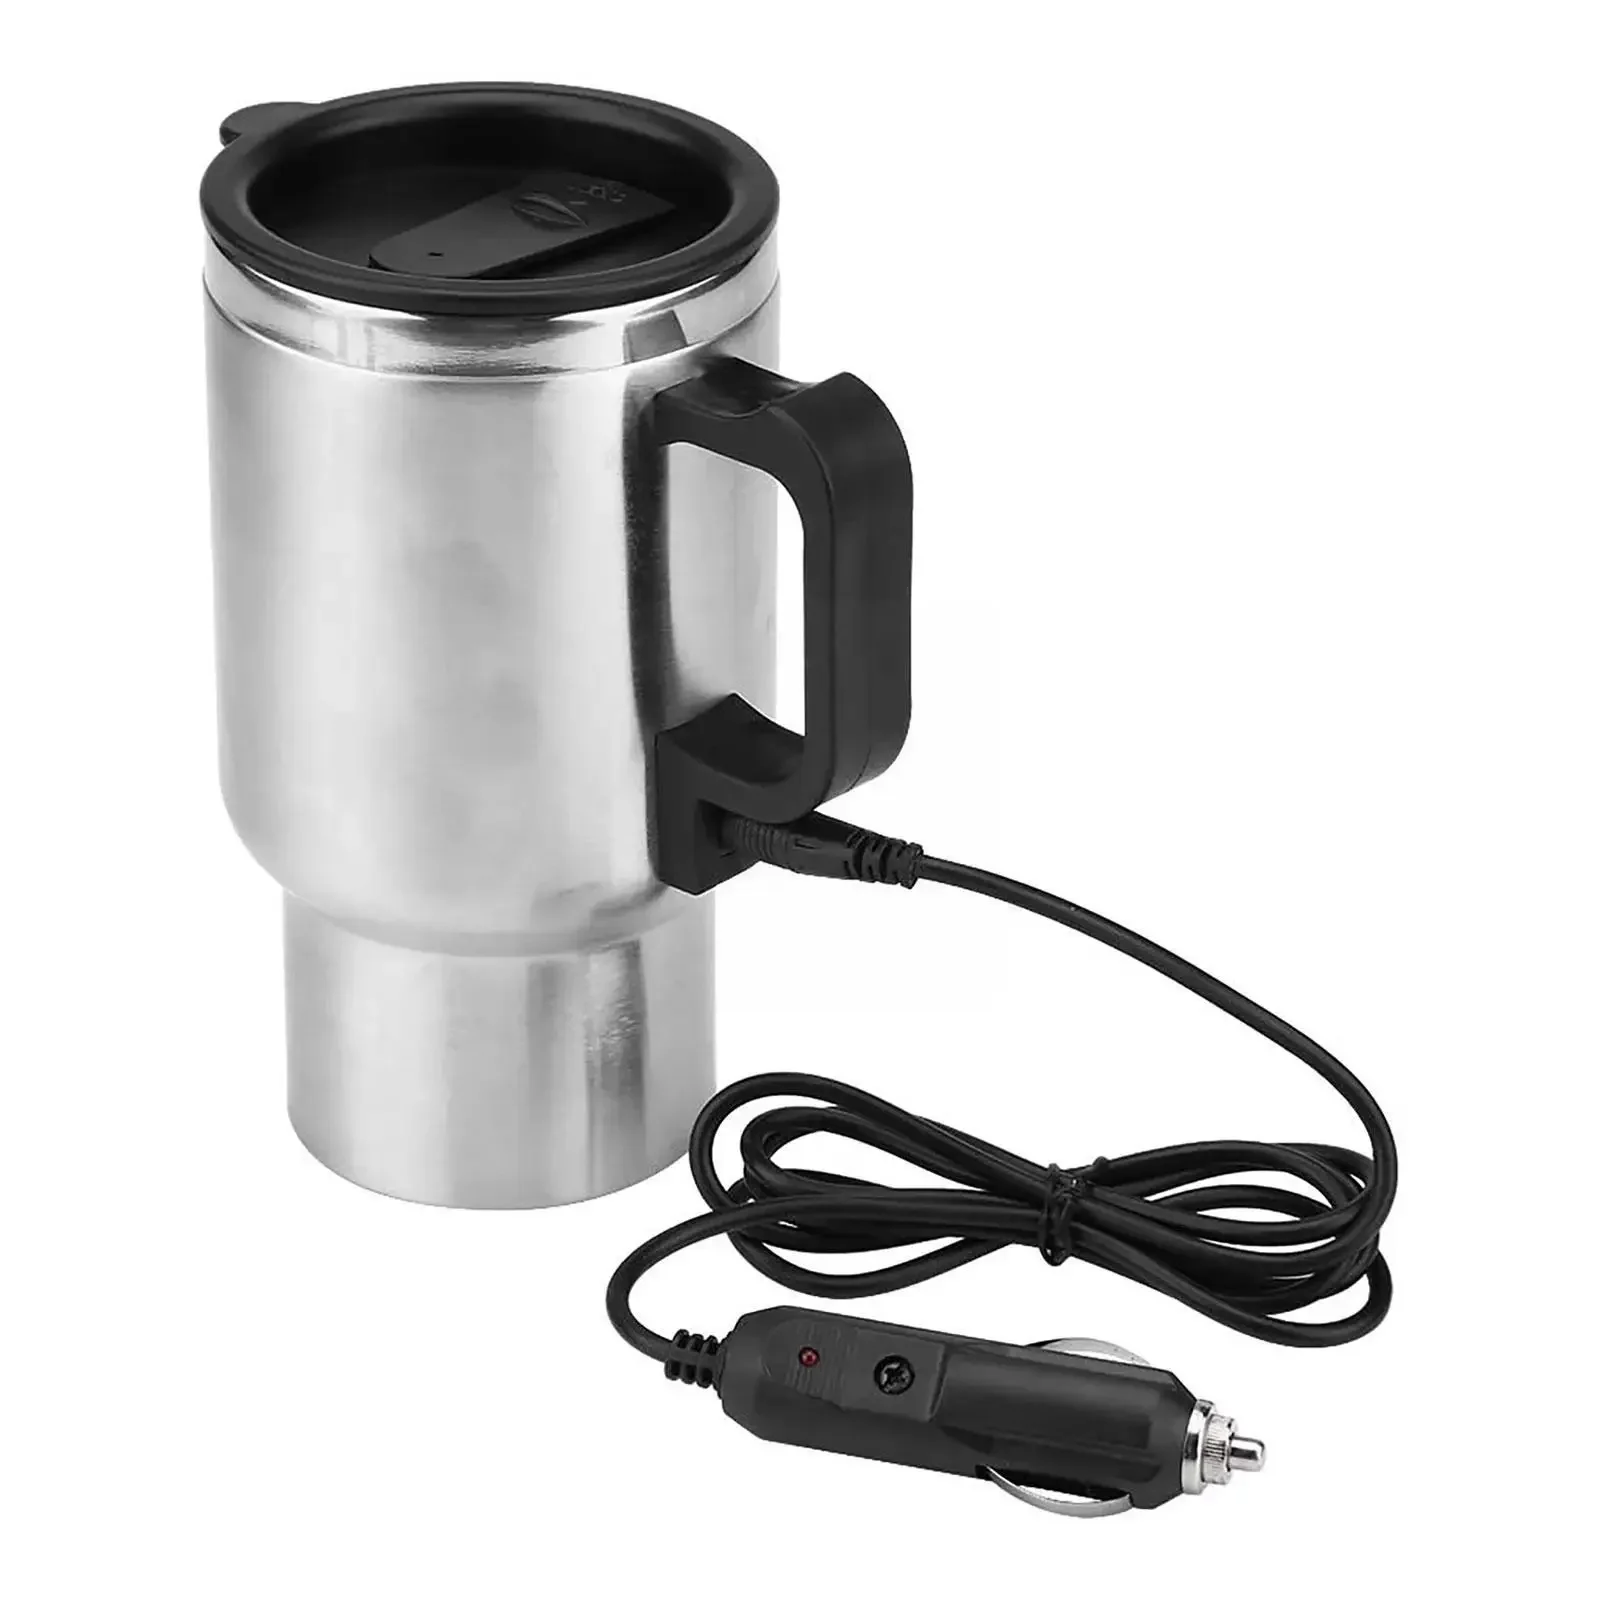 500ML 12V Car Electric Heating Cup USB Heating Cup Water Heater Bottle D... - $20.68